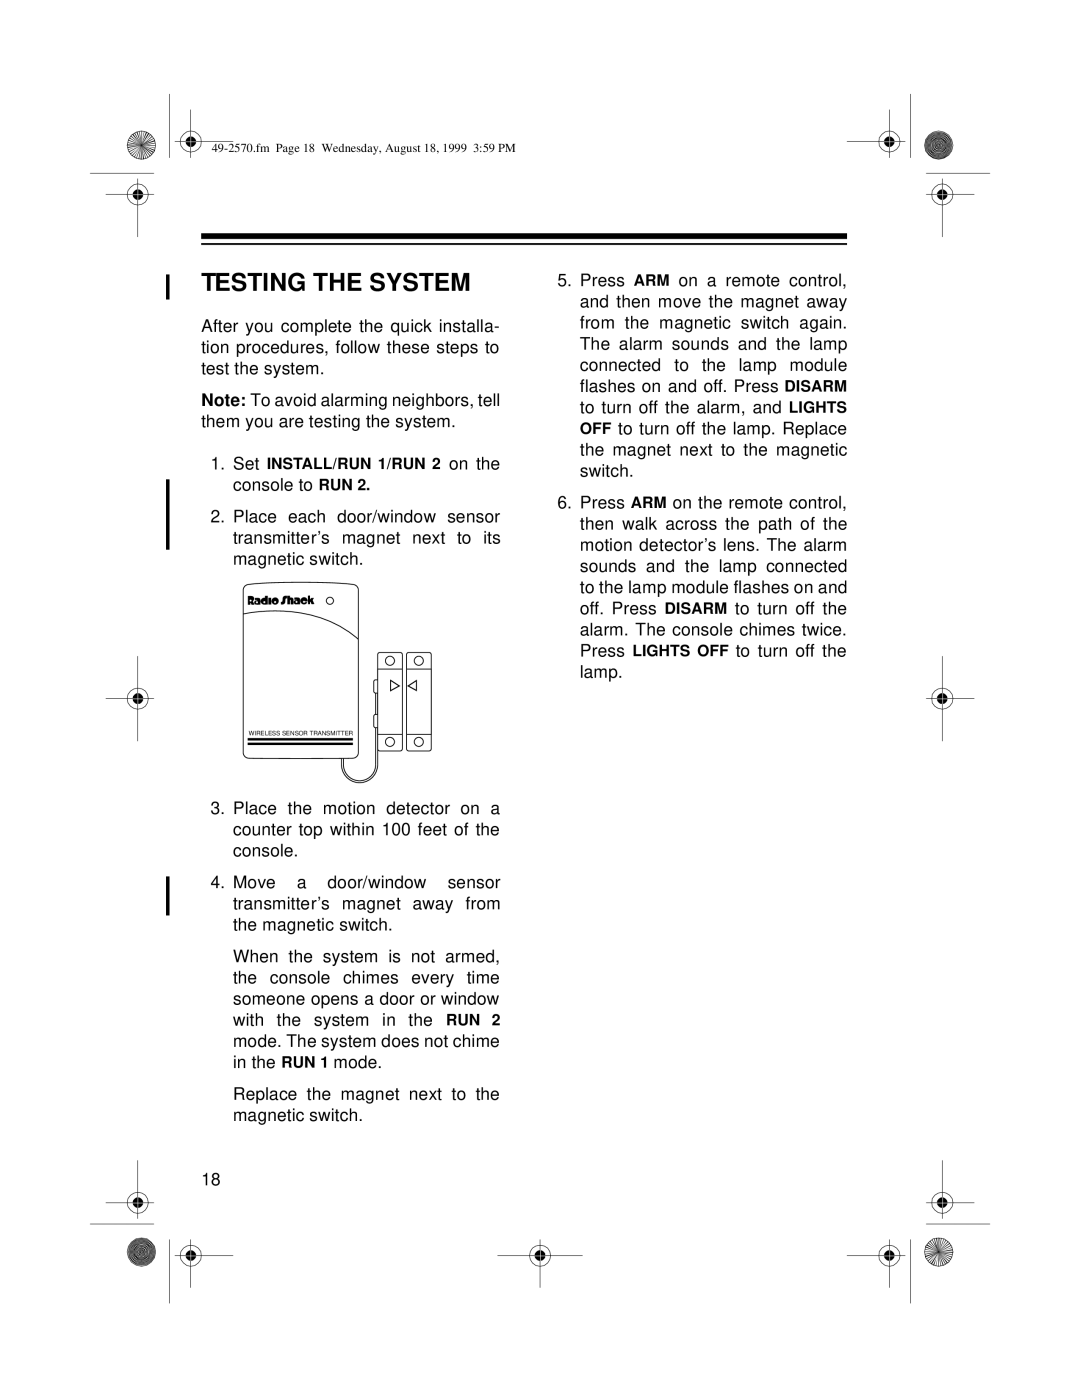 Radio Shack 49-2570 owner manual Testing The System 